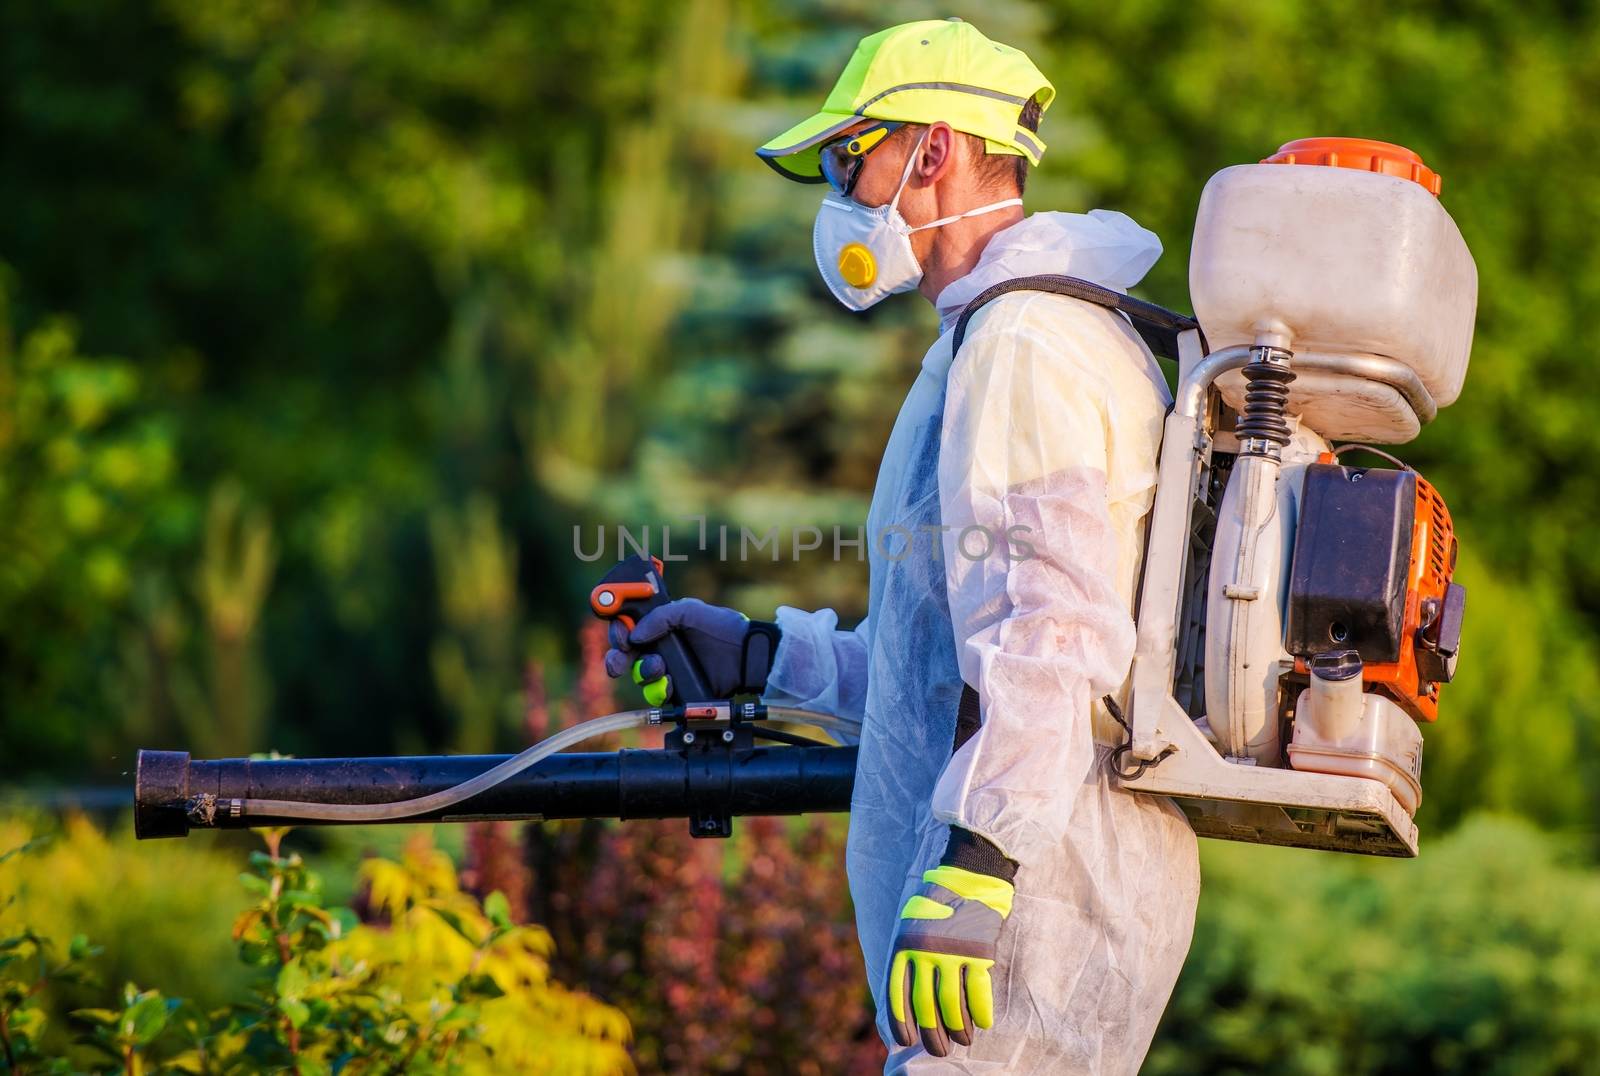 Garden Pest Control Service by welcomia